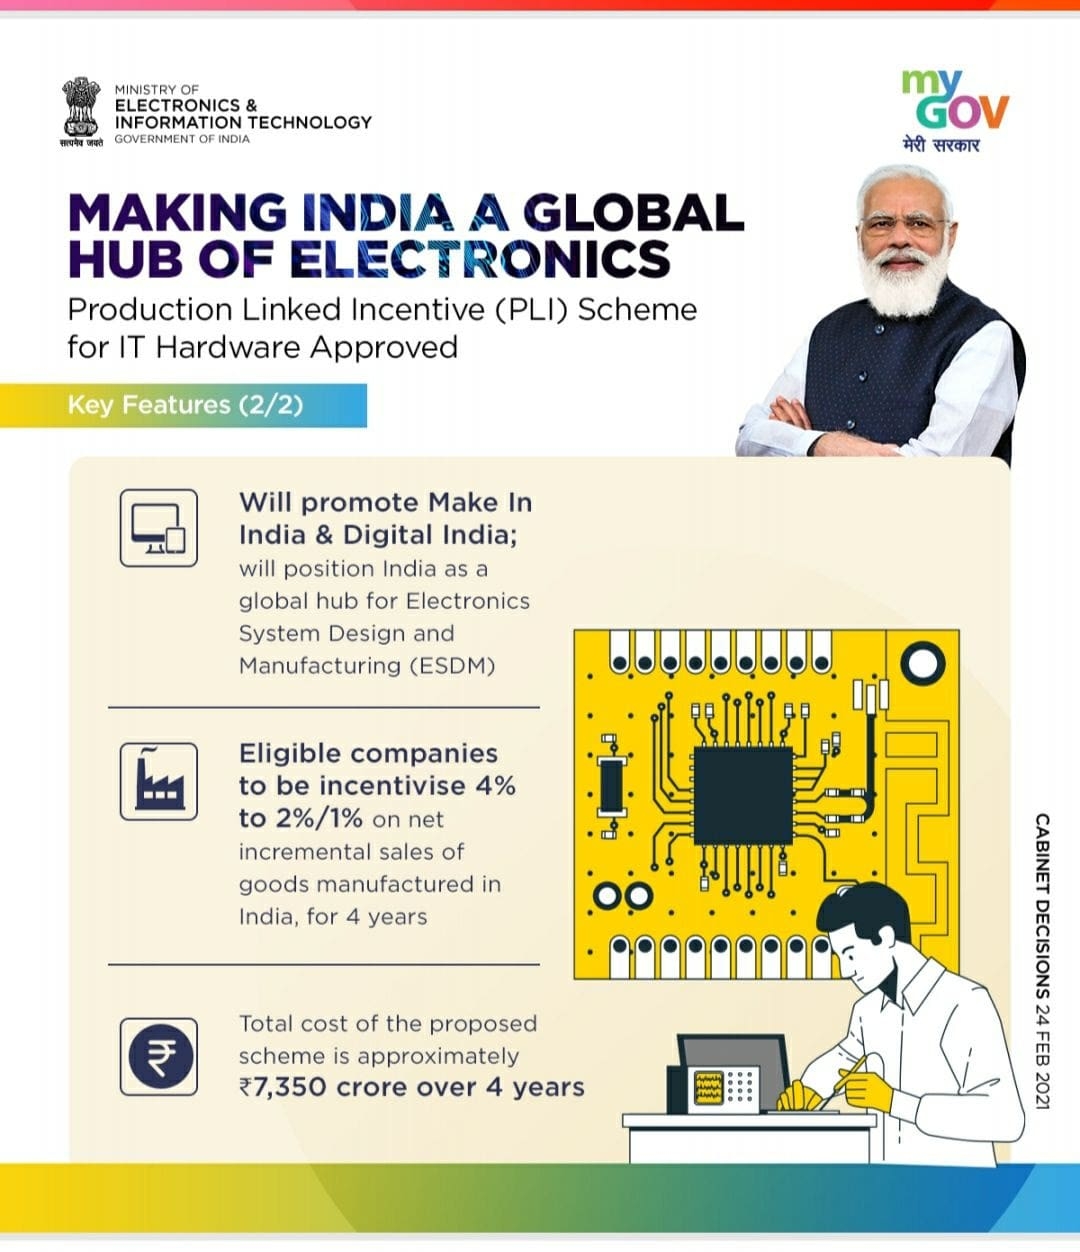 <p>The Union Cabinet headed by PM Narendra MDI has approved Production Linked Incentive (PLI) Scheme for IT hardware in the country. This aims to make India a global hub of Electronics.</p>…